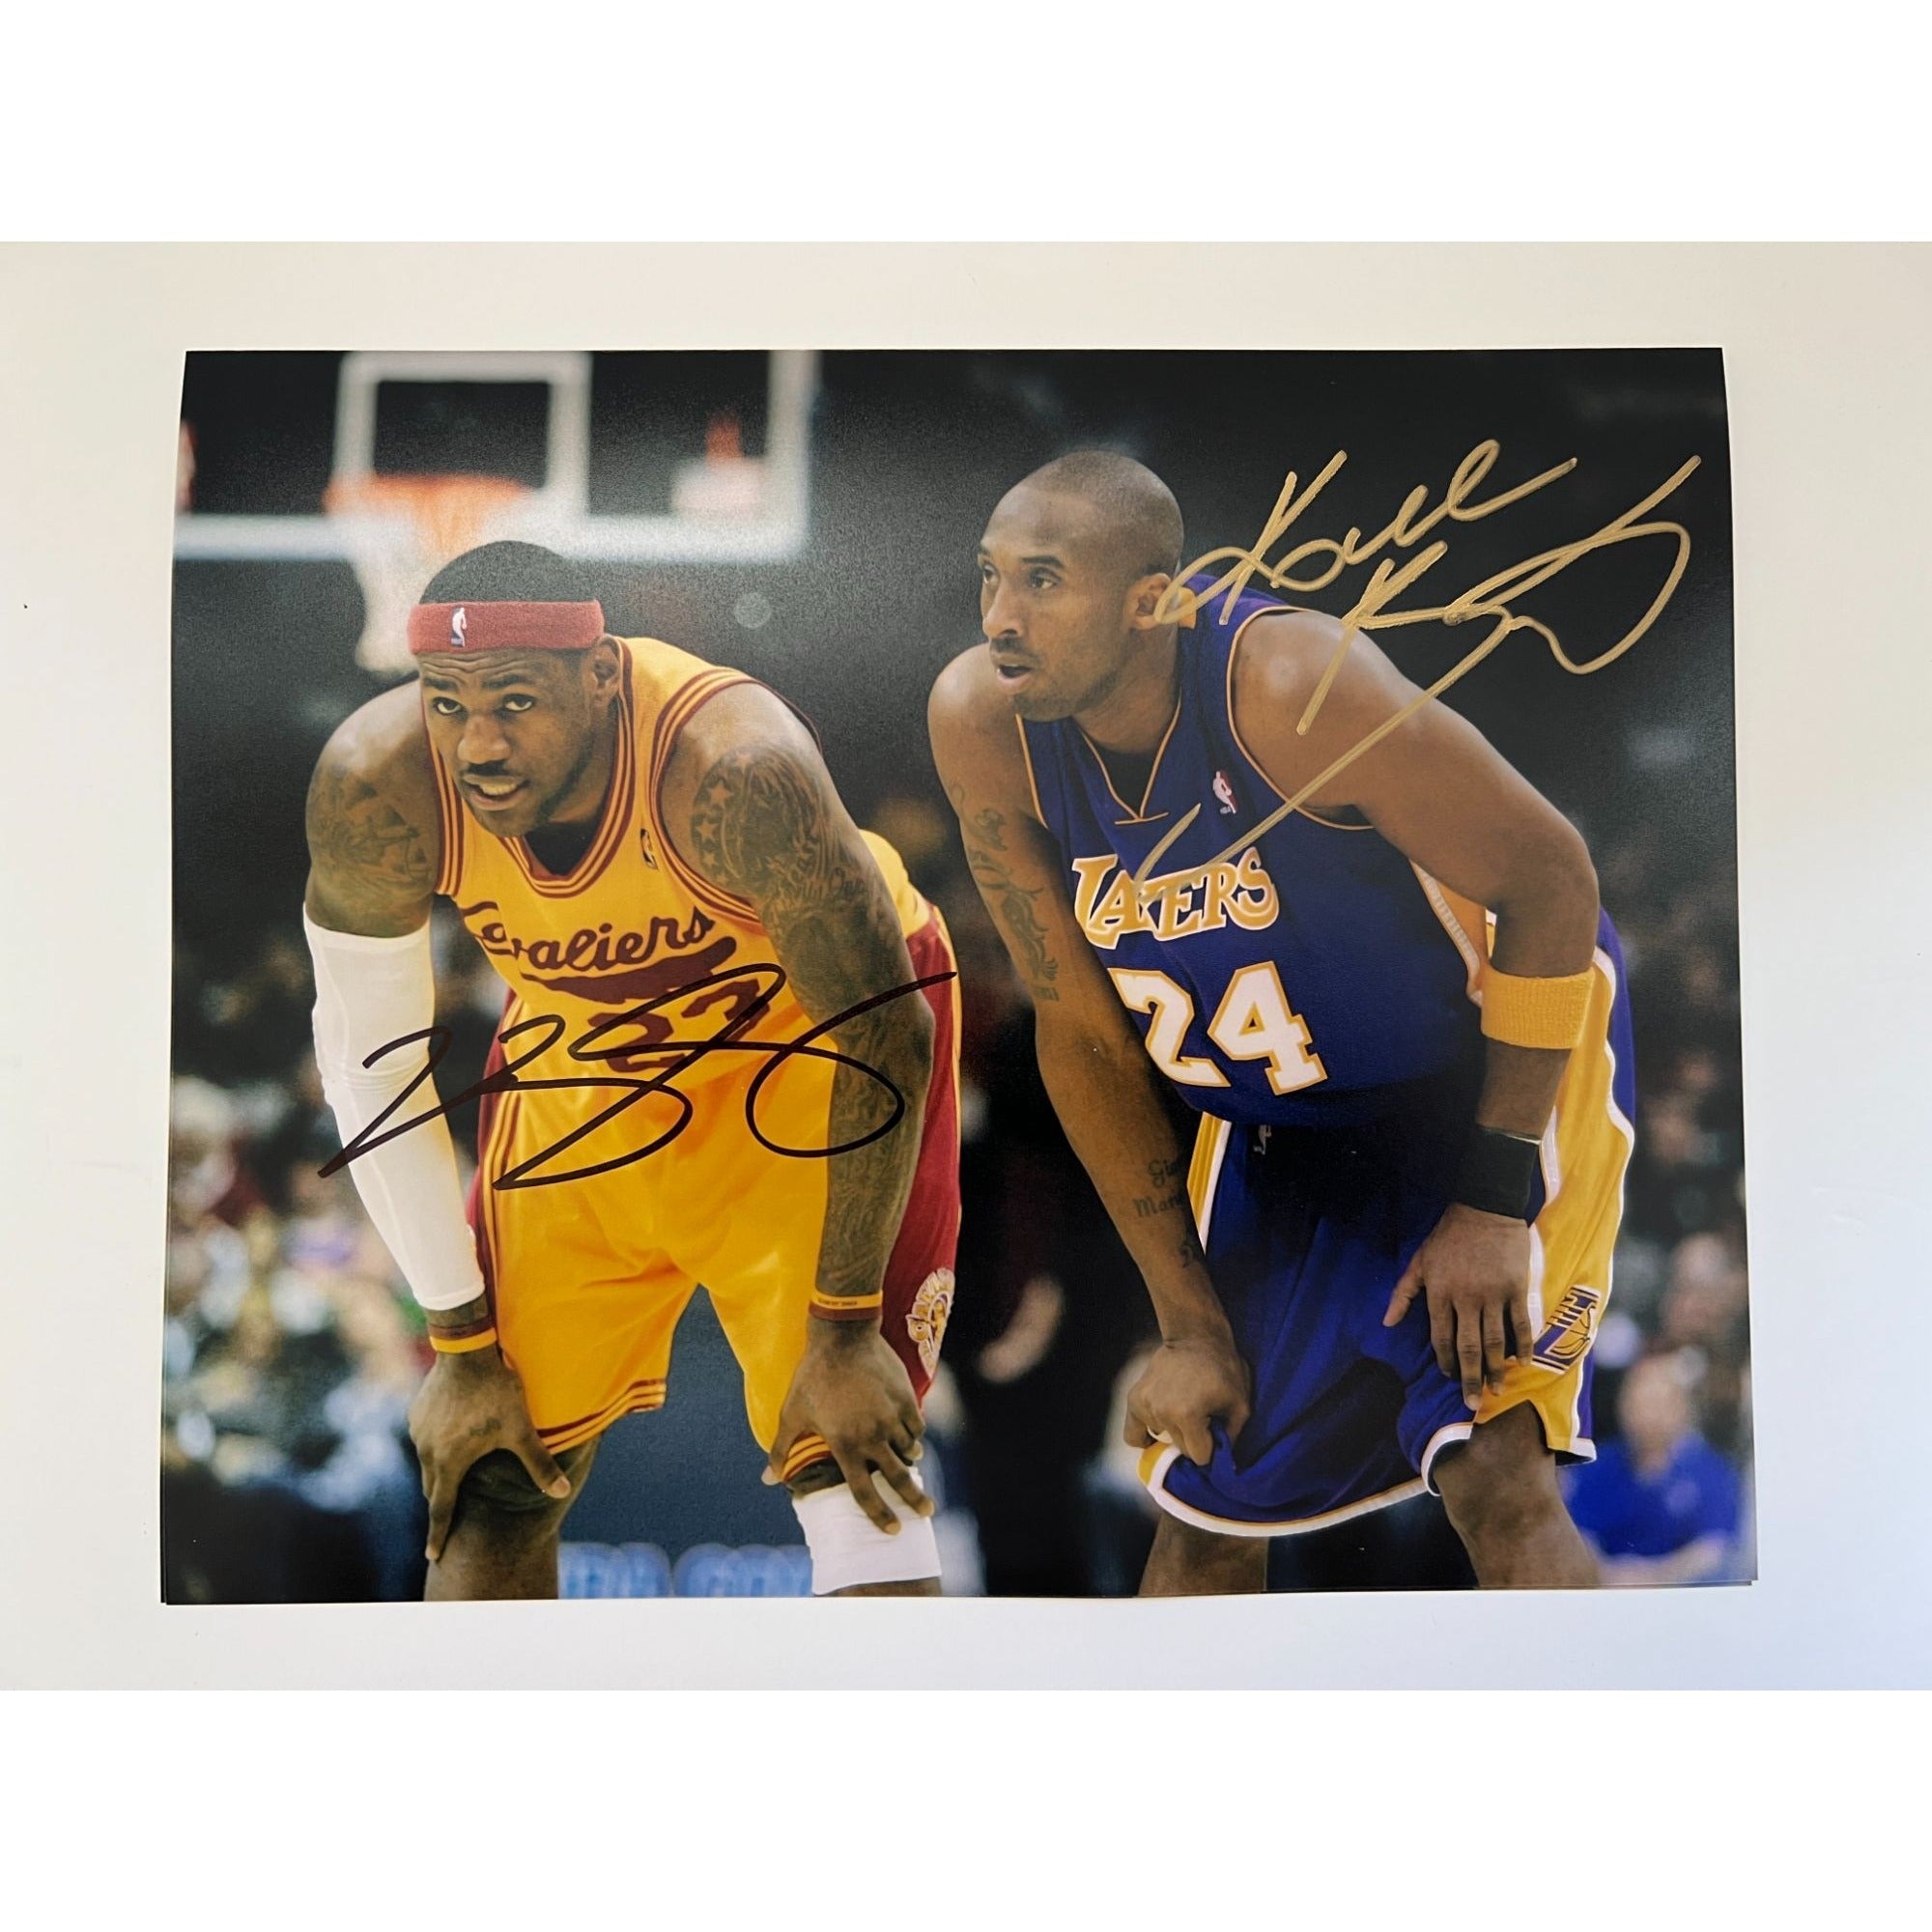 Kobe Bryant and LeBron James vintage 8x10 photo signed with proof